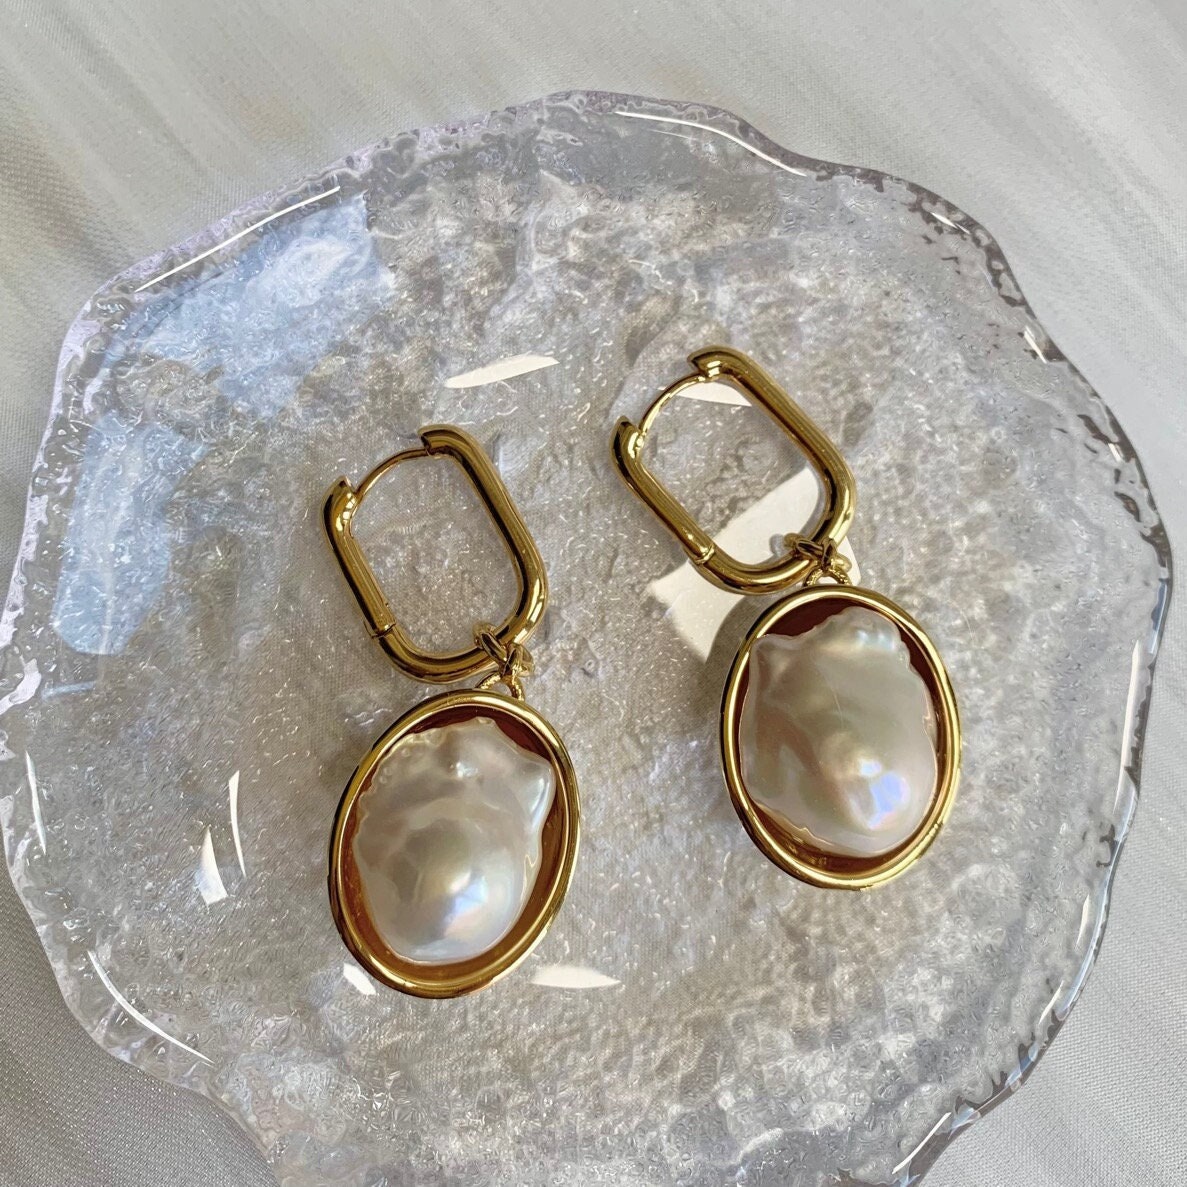 Large Fireball Baroque Pearl Drop Earrings, 18K Gold Plated Egg Shaped Real Hoop Contemporary Earrings